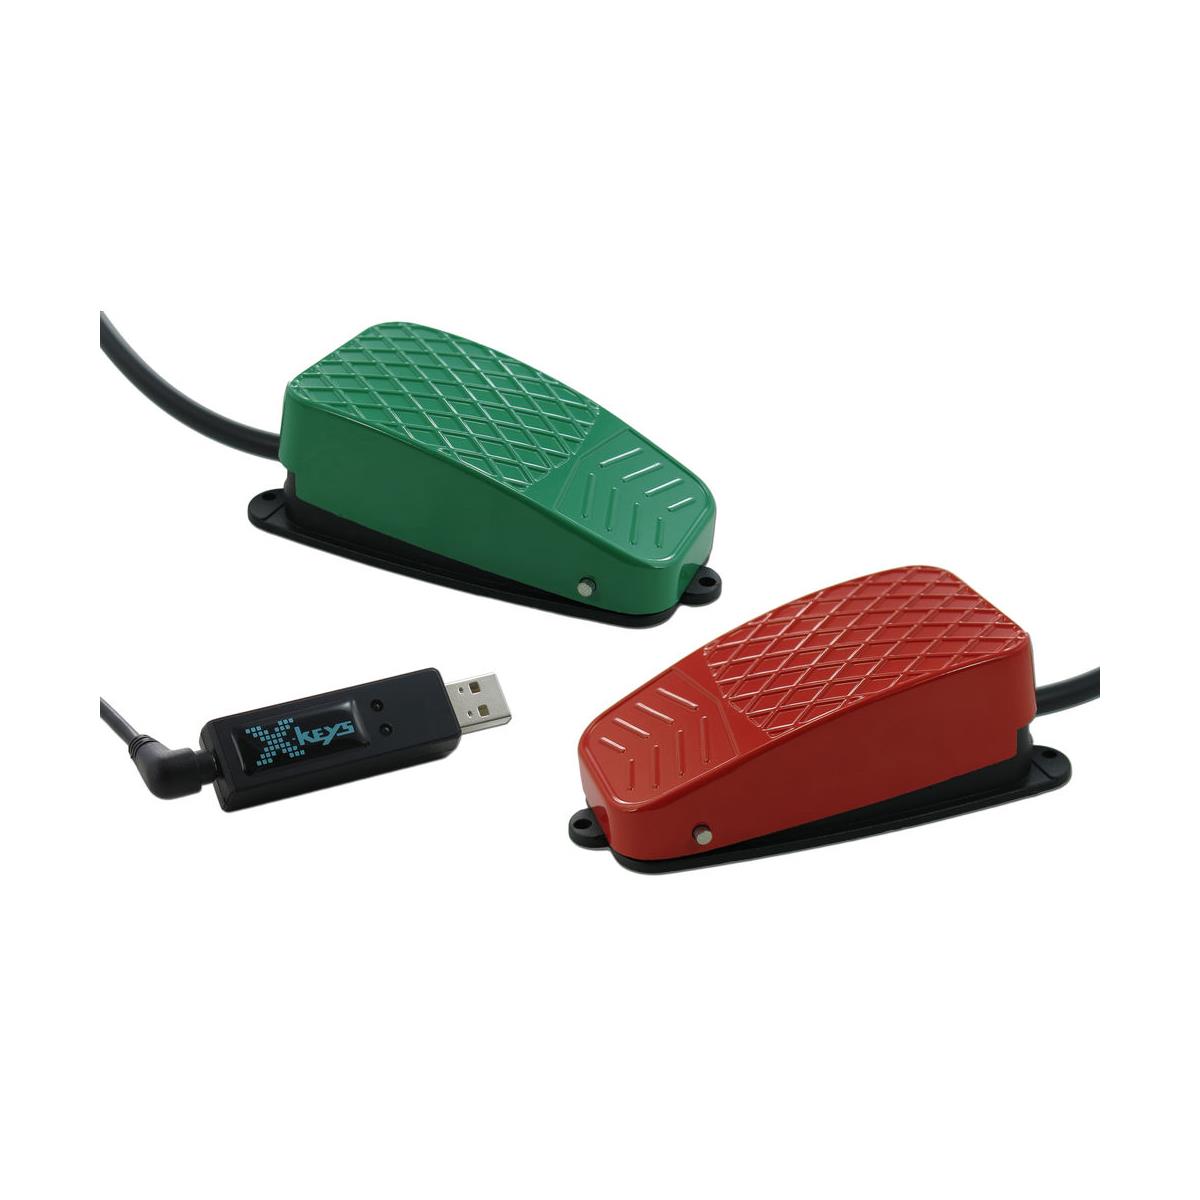 

X-Keys USB Three-Switch Interface with Green and Red Commercial Foot Switches